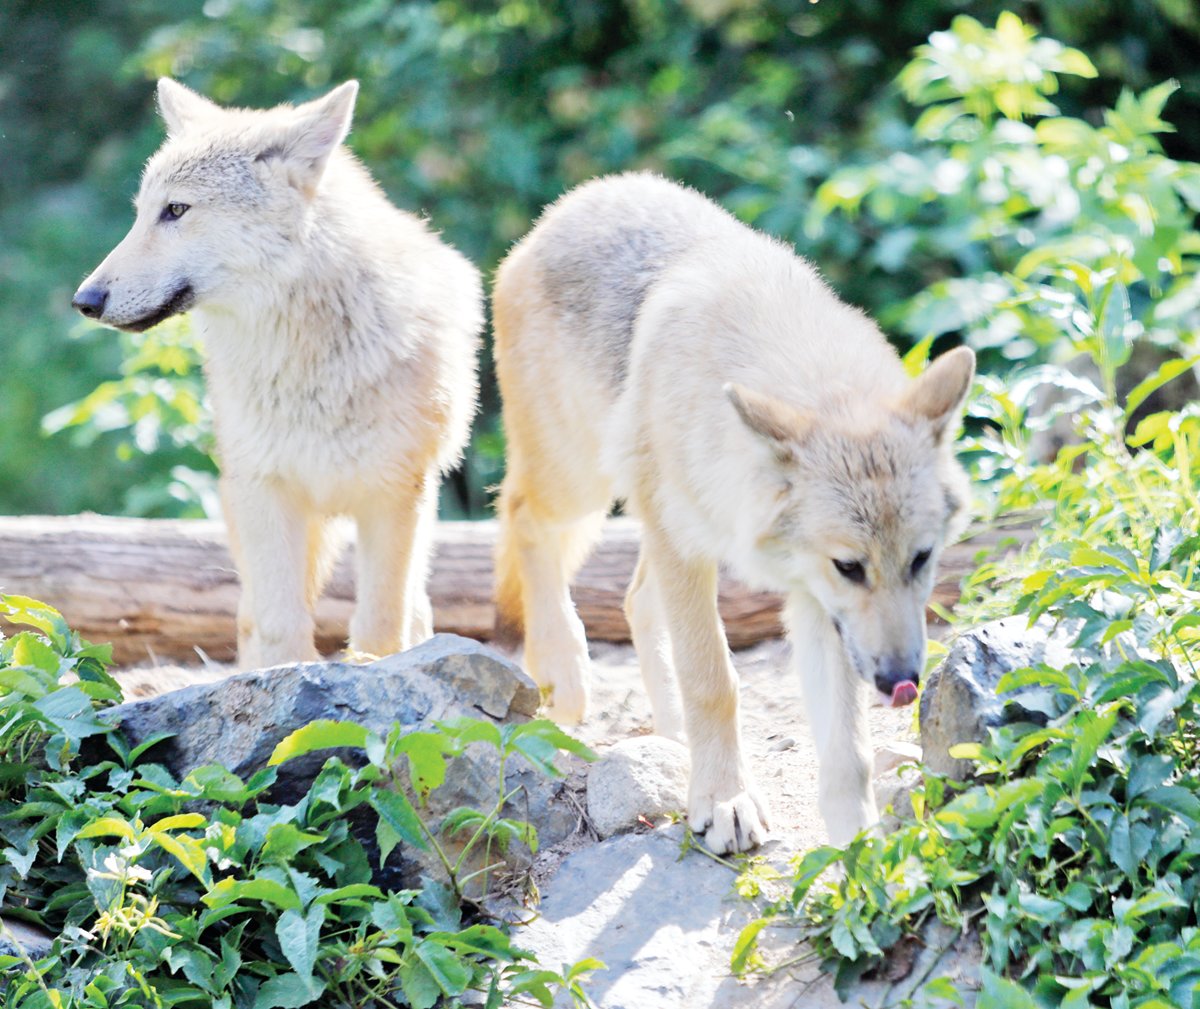 The Wolf Center’s newest residents, Caz and Blackstone, were allowed to joined the rest of the Exhibit Pack late last week and were getting acquainted with Rieka, Axel and Grayson over the week.